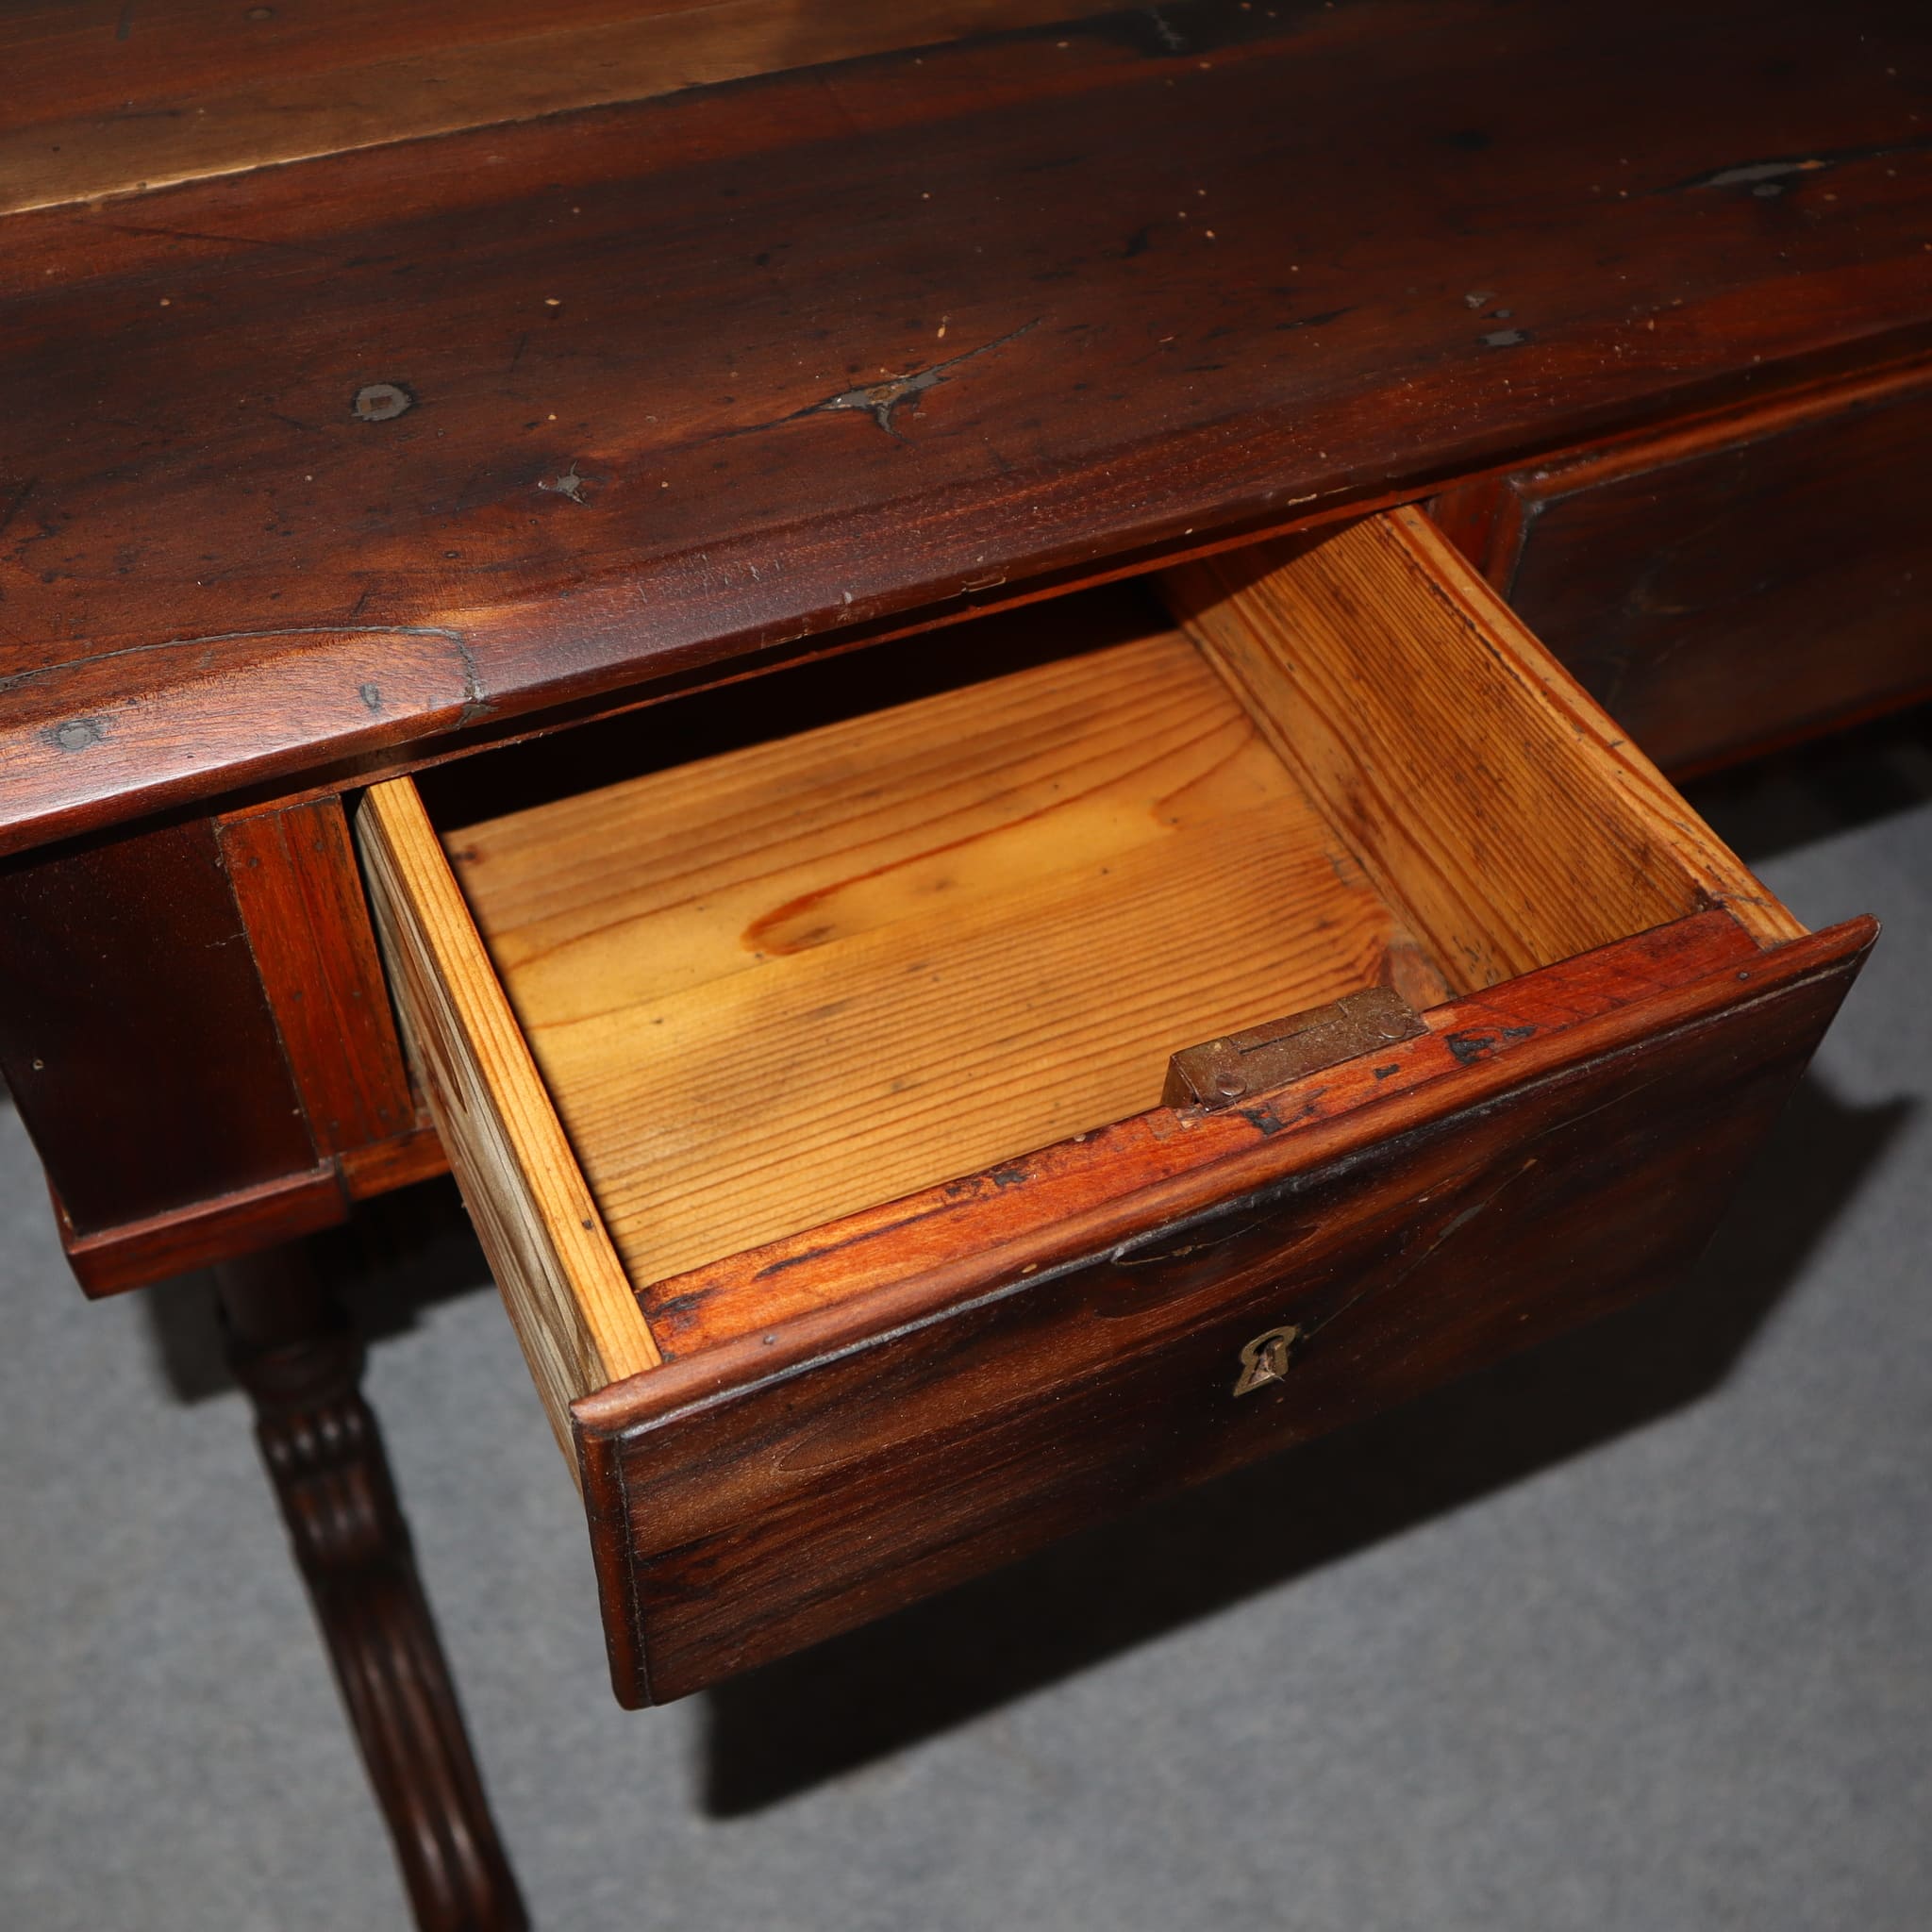 vintage visions-antiques-tables-writing-table-in-solid-walnut-period-1870-luigi-filippo-siciliano-view-detail-drawer-open